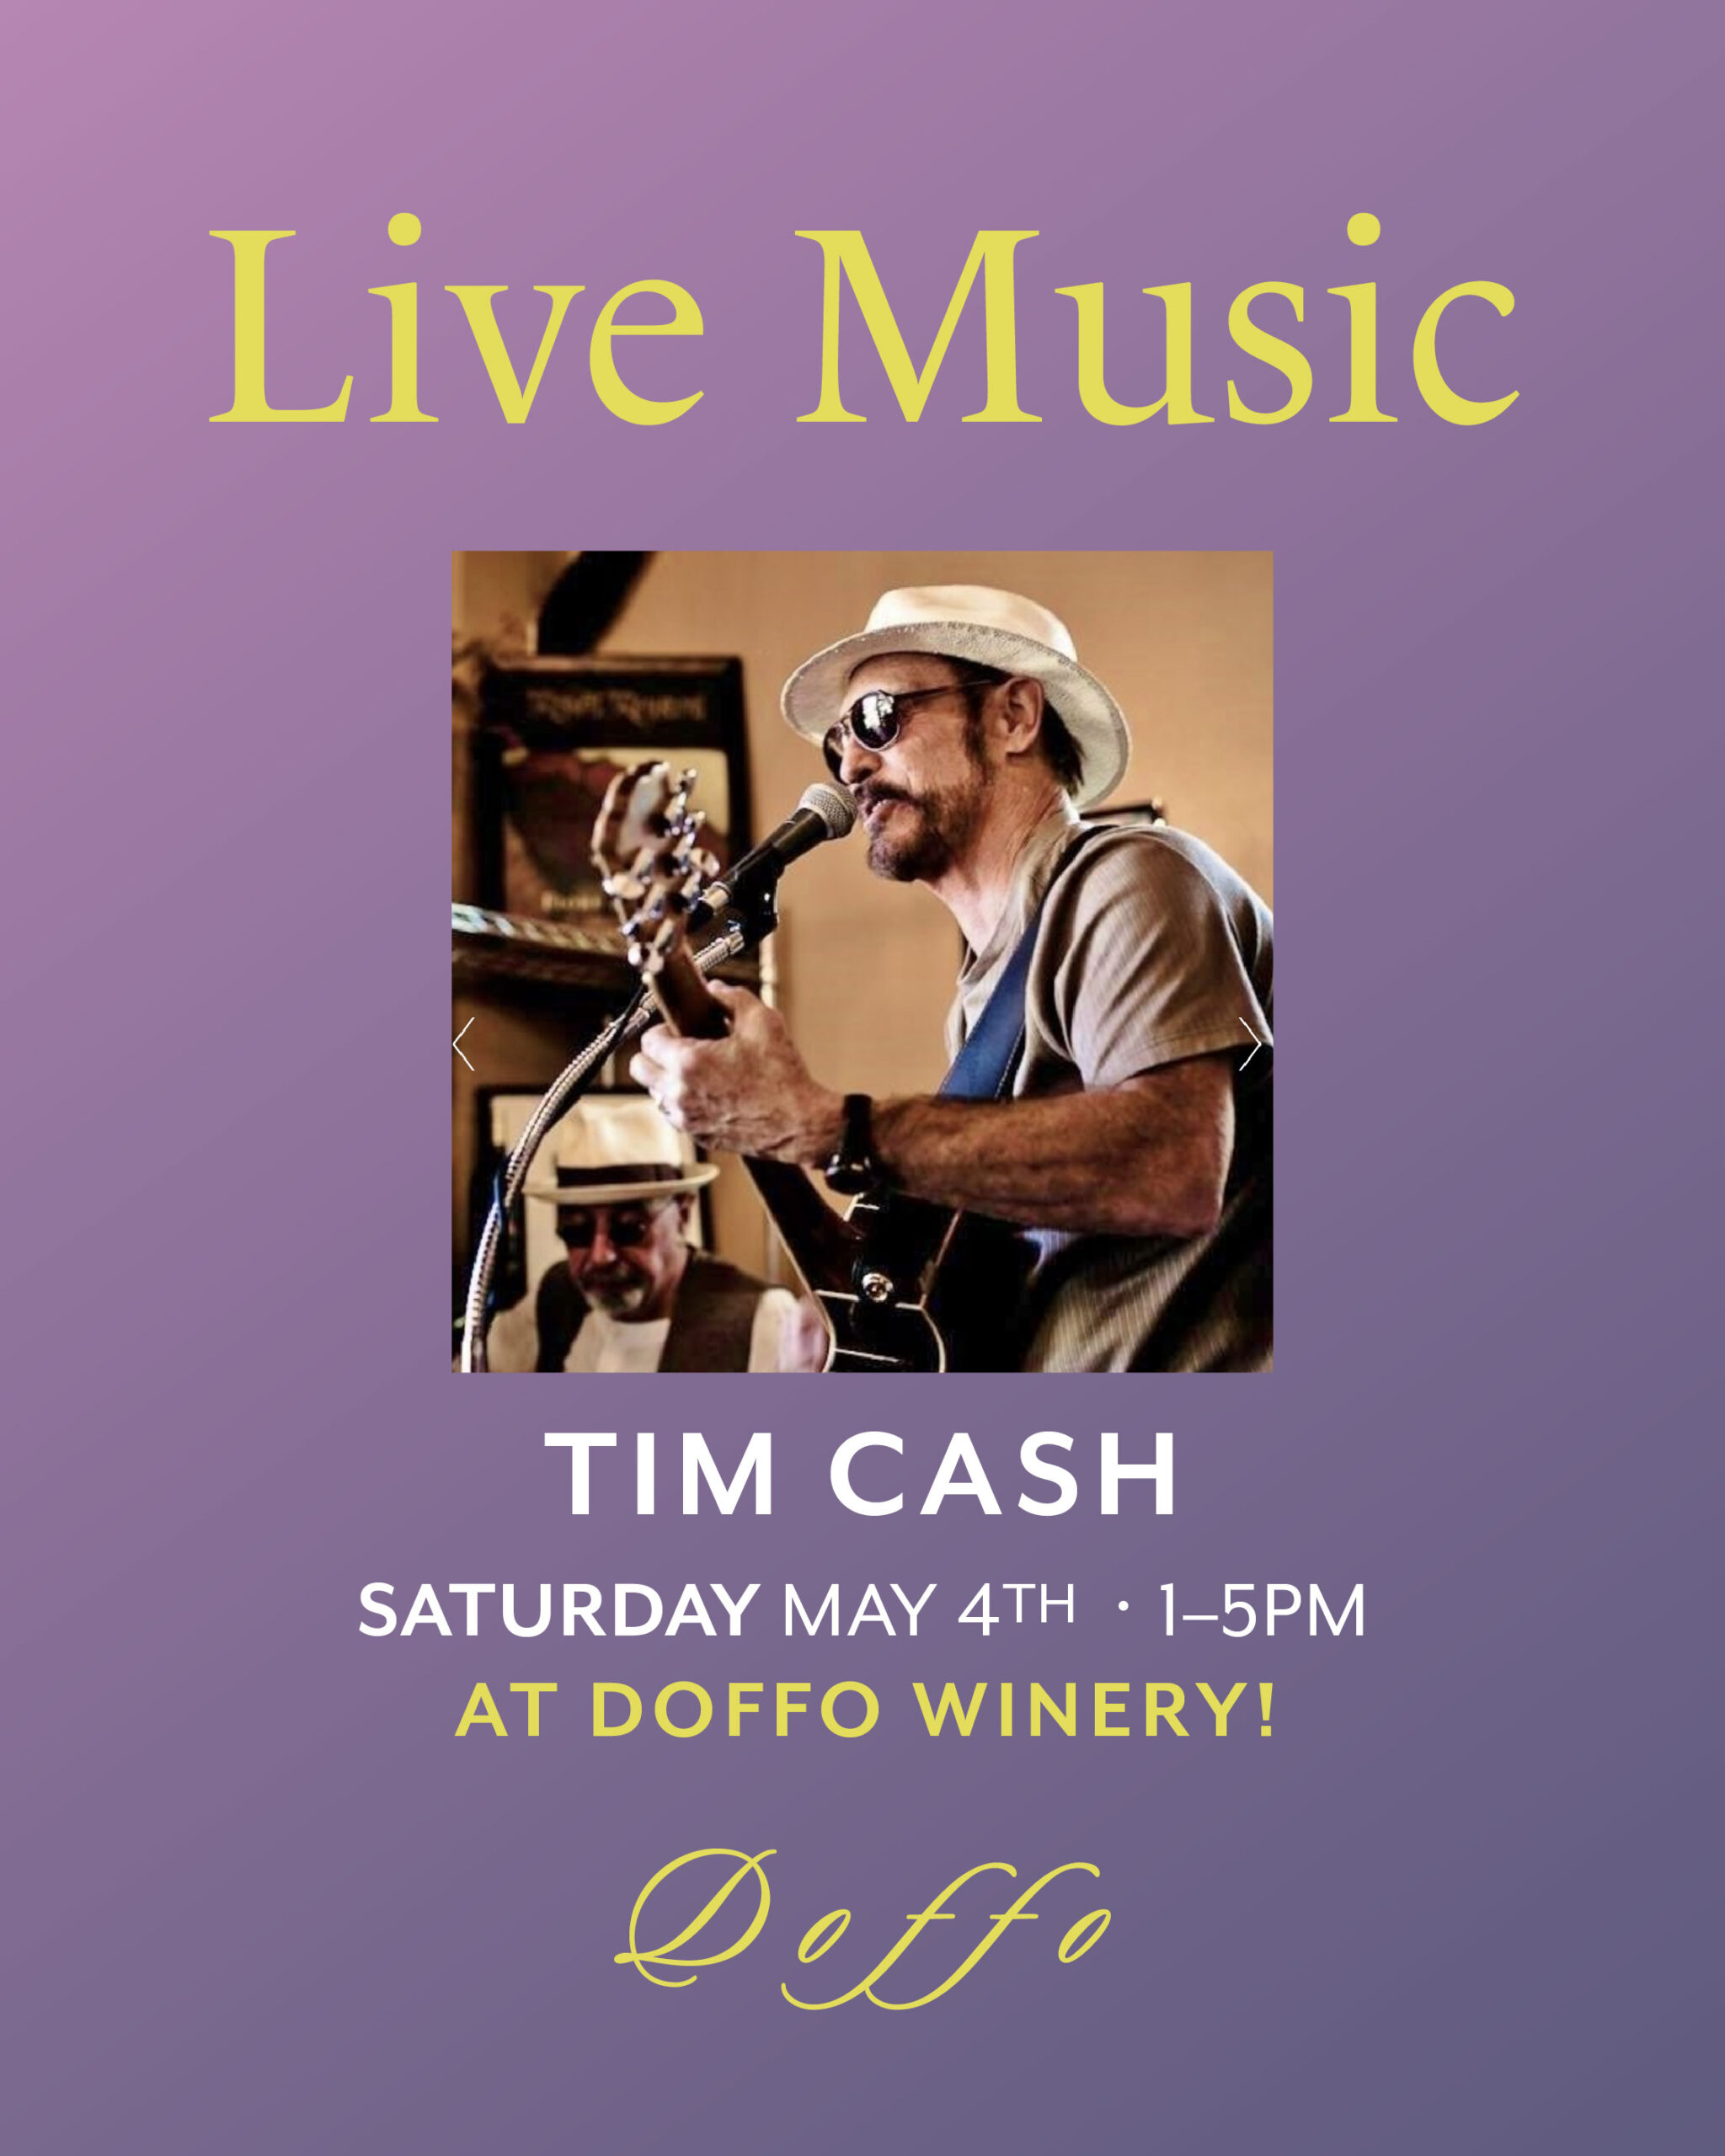 Live Music at the Doffo Winery | Tim Cash